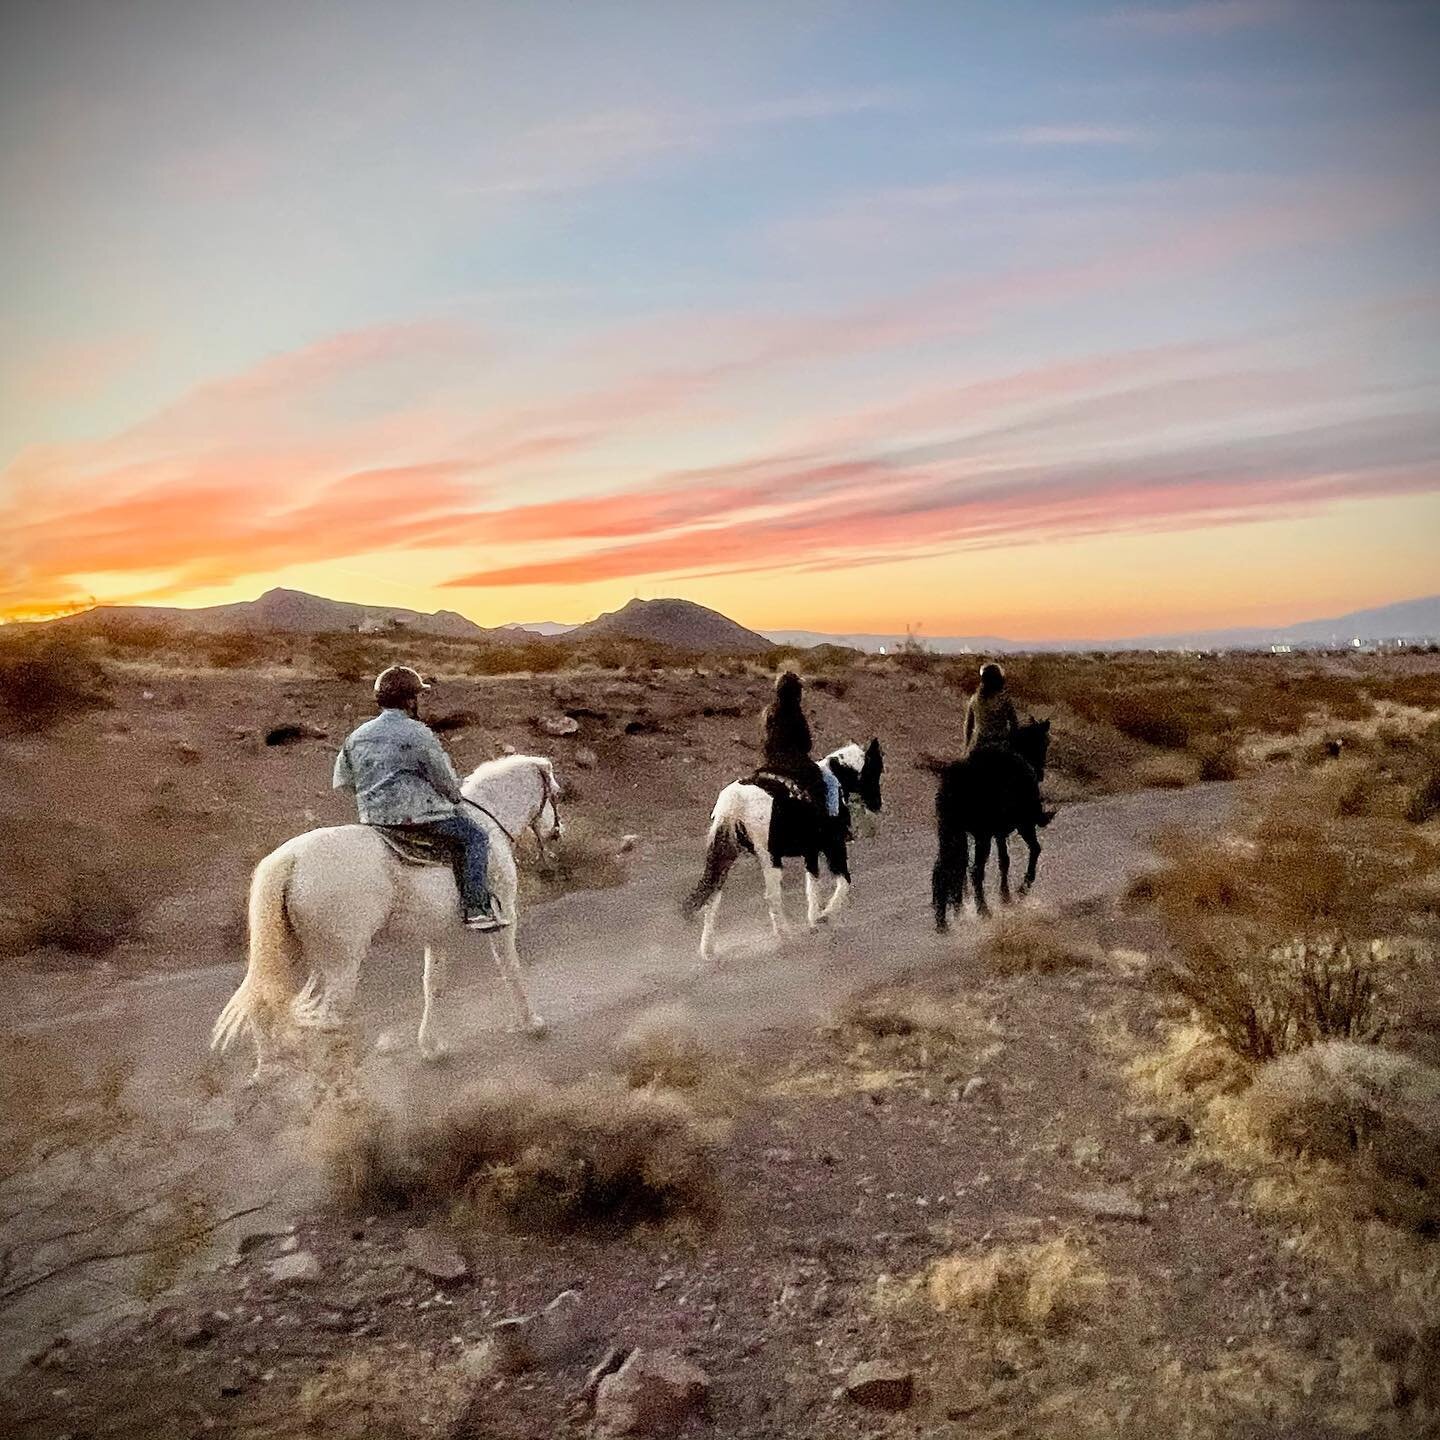 Come ride with us! 🤠  Fresh air, gentle horses and beautiful sunsets provide a refreshing break from everyday life! Message us to book your adventure today! 🐴🌅✨